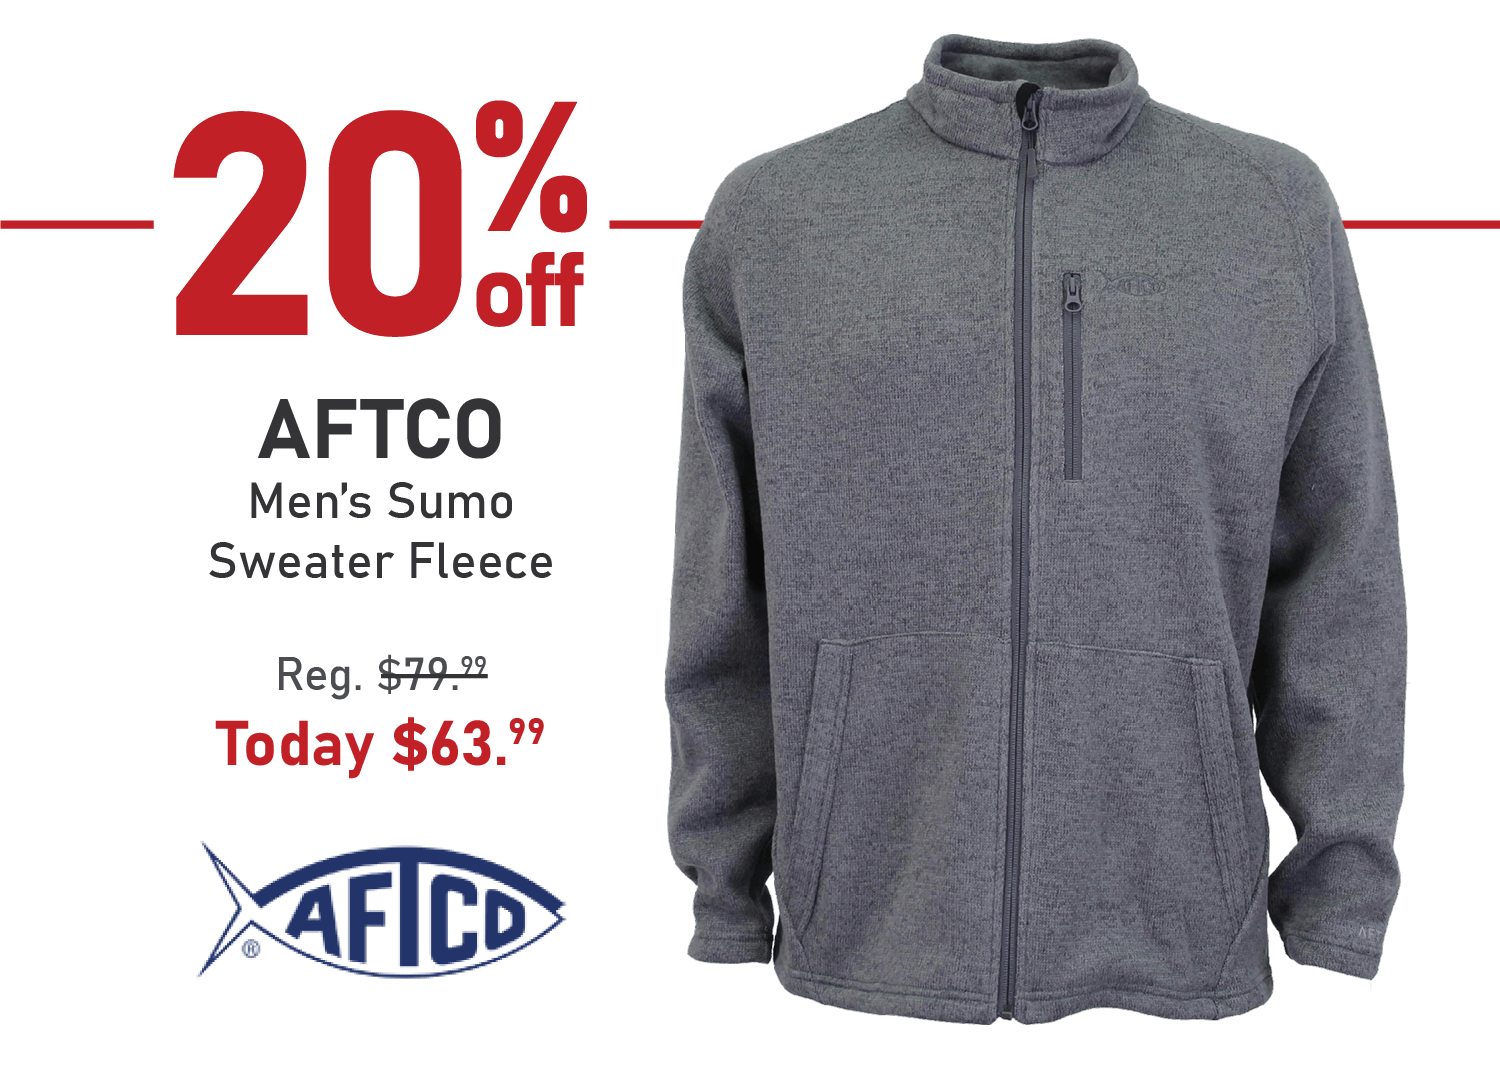 Save 20% on the AFTCO Men's Sumo Sweater Fleece